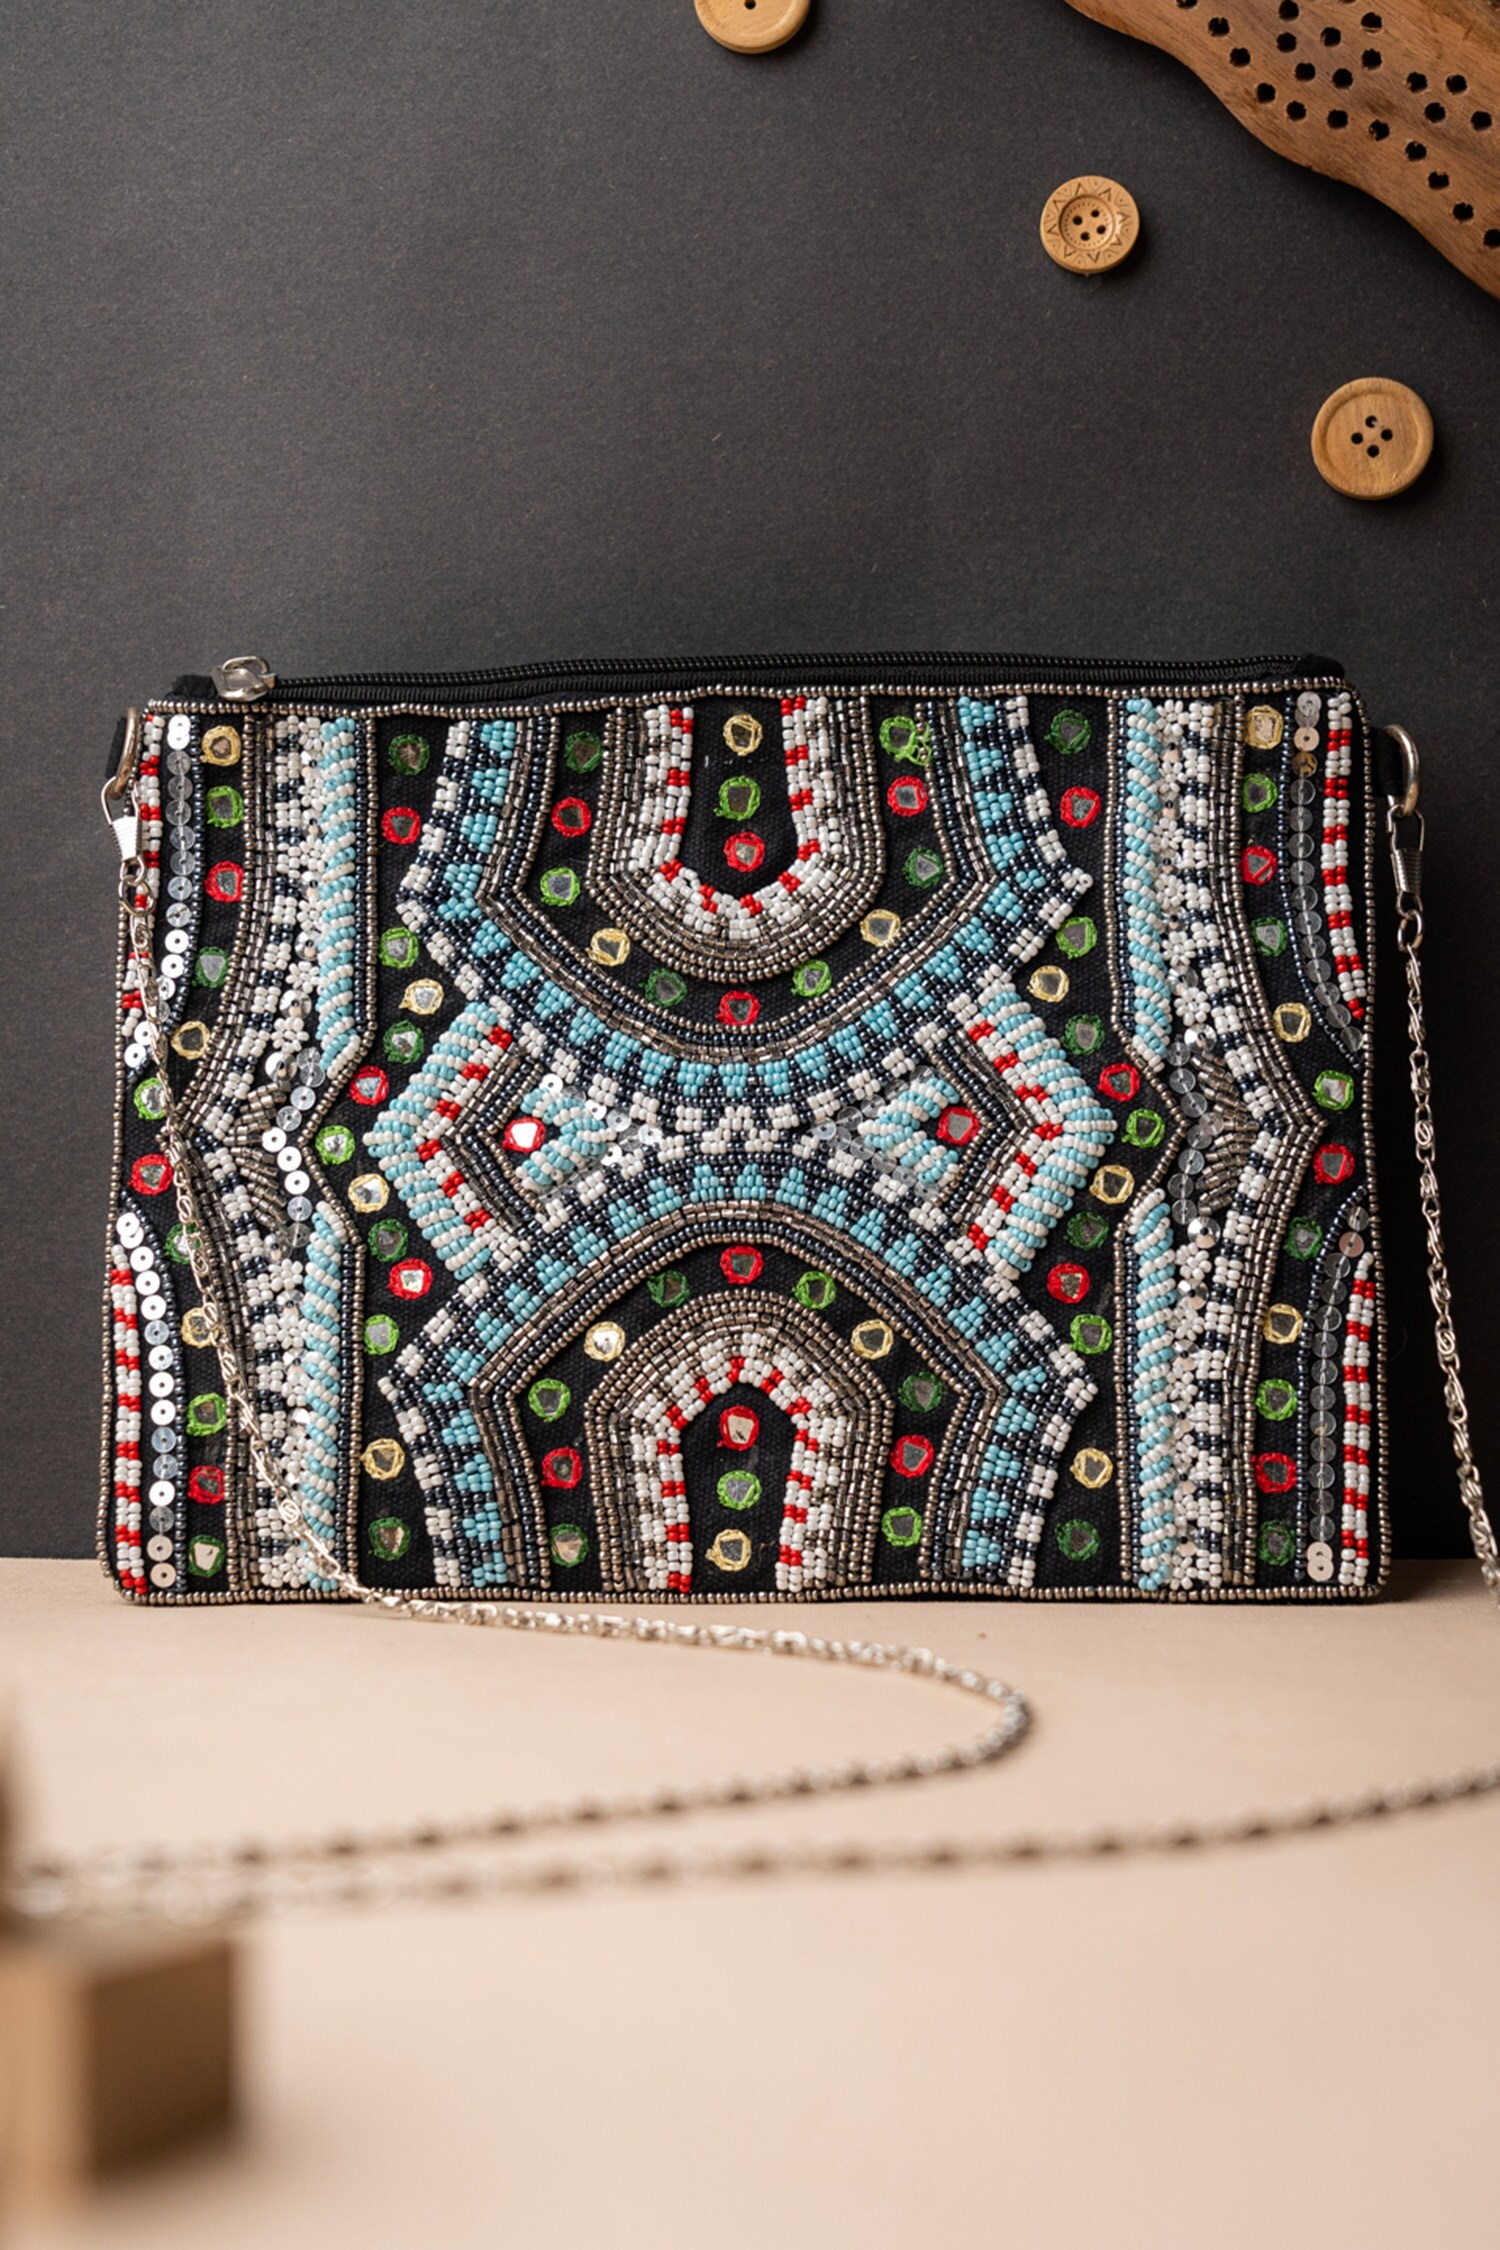 NR BY NIDHI RATHI Geometric Embroidered Rectangle Pouch